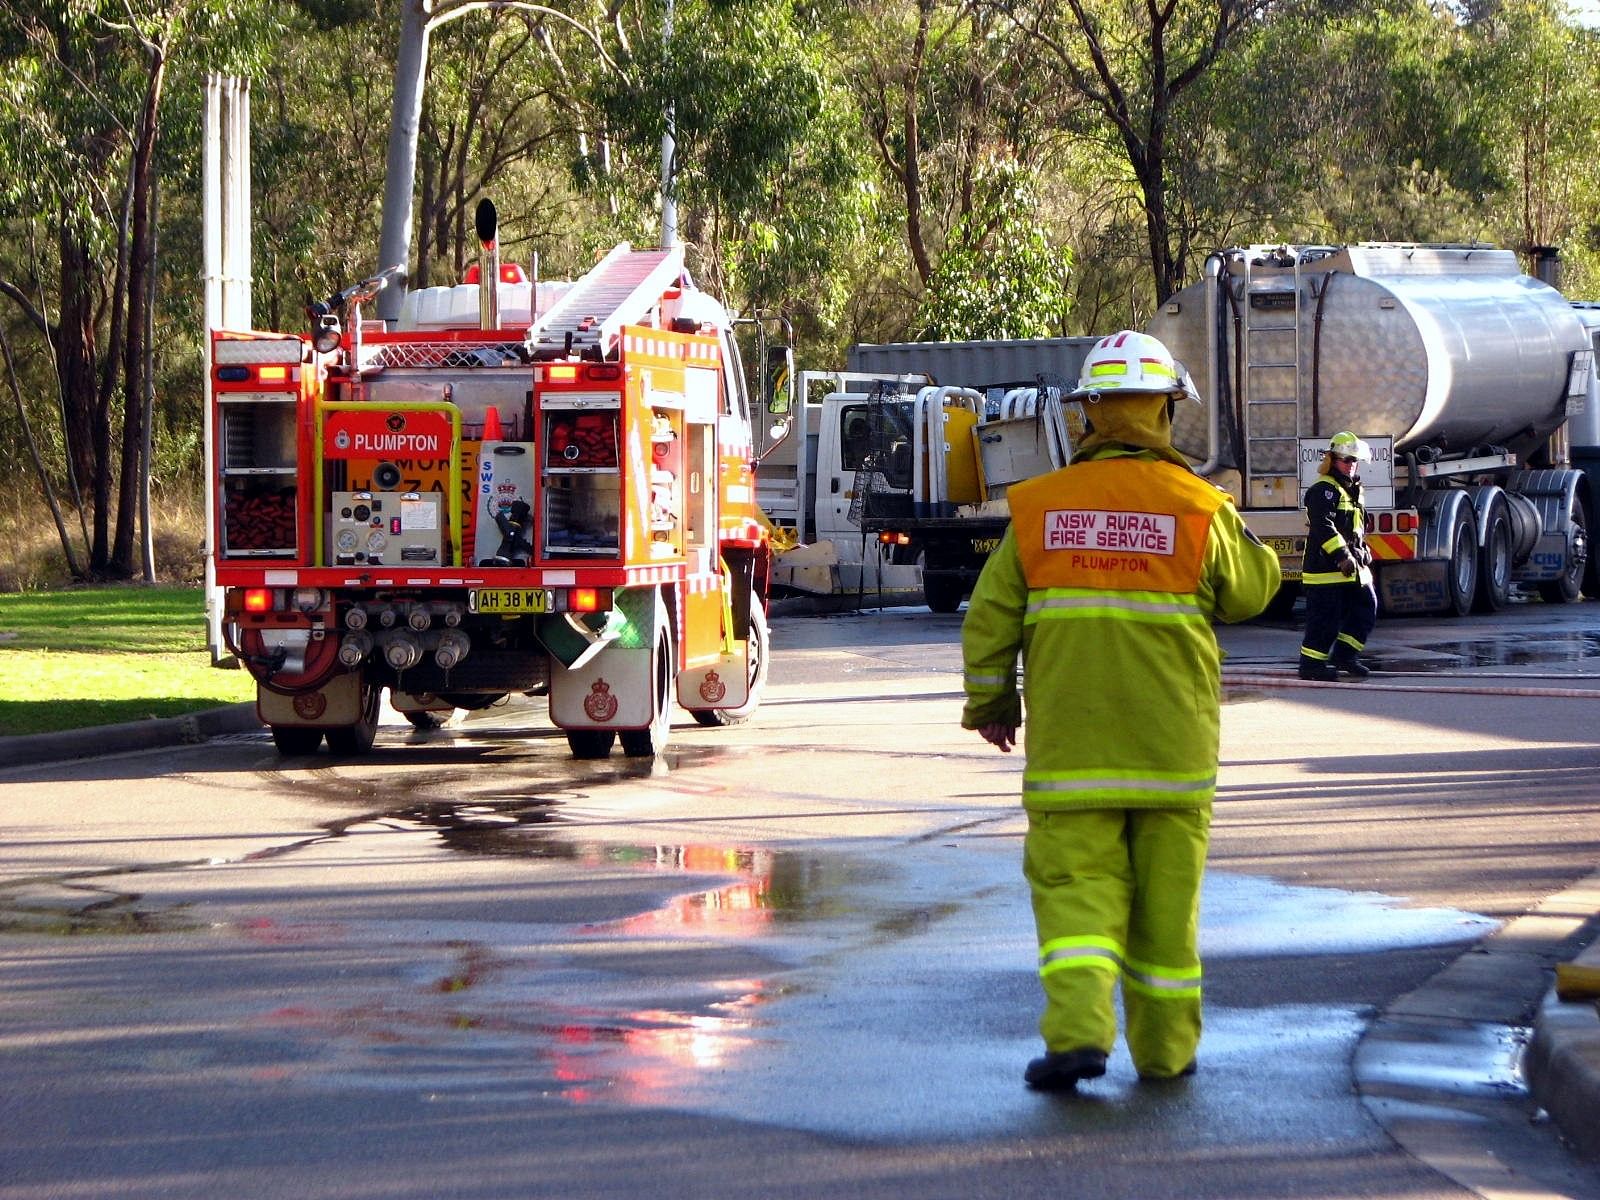 new south whales rural fire service vehicles and workers on site